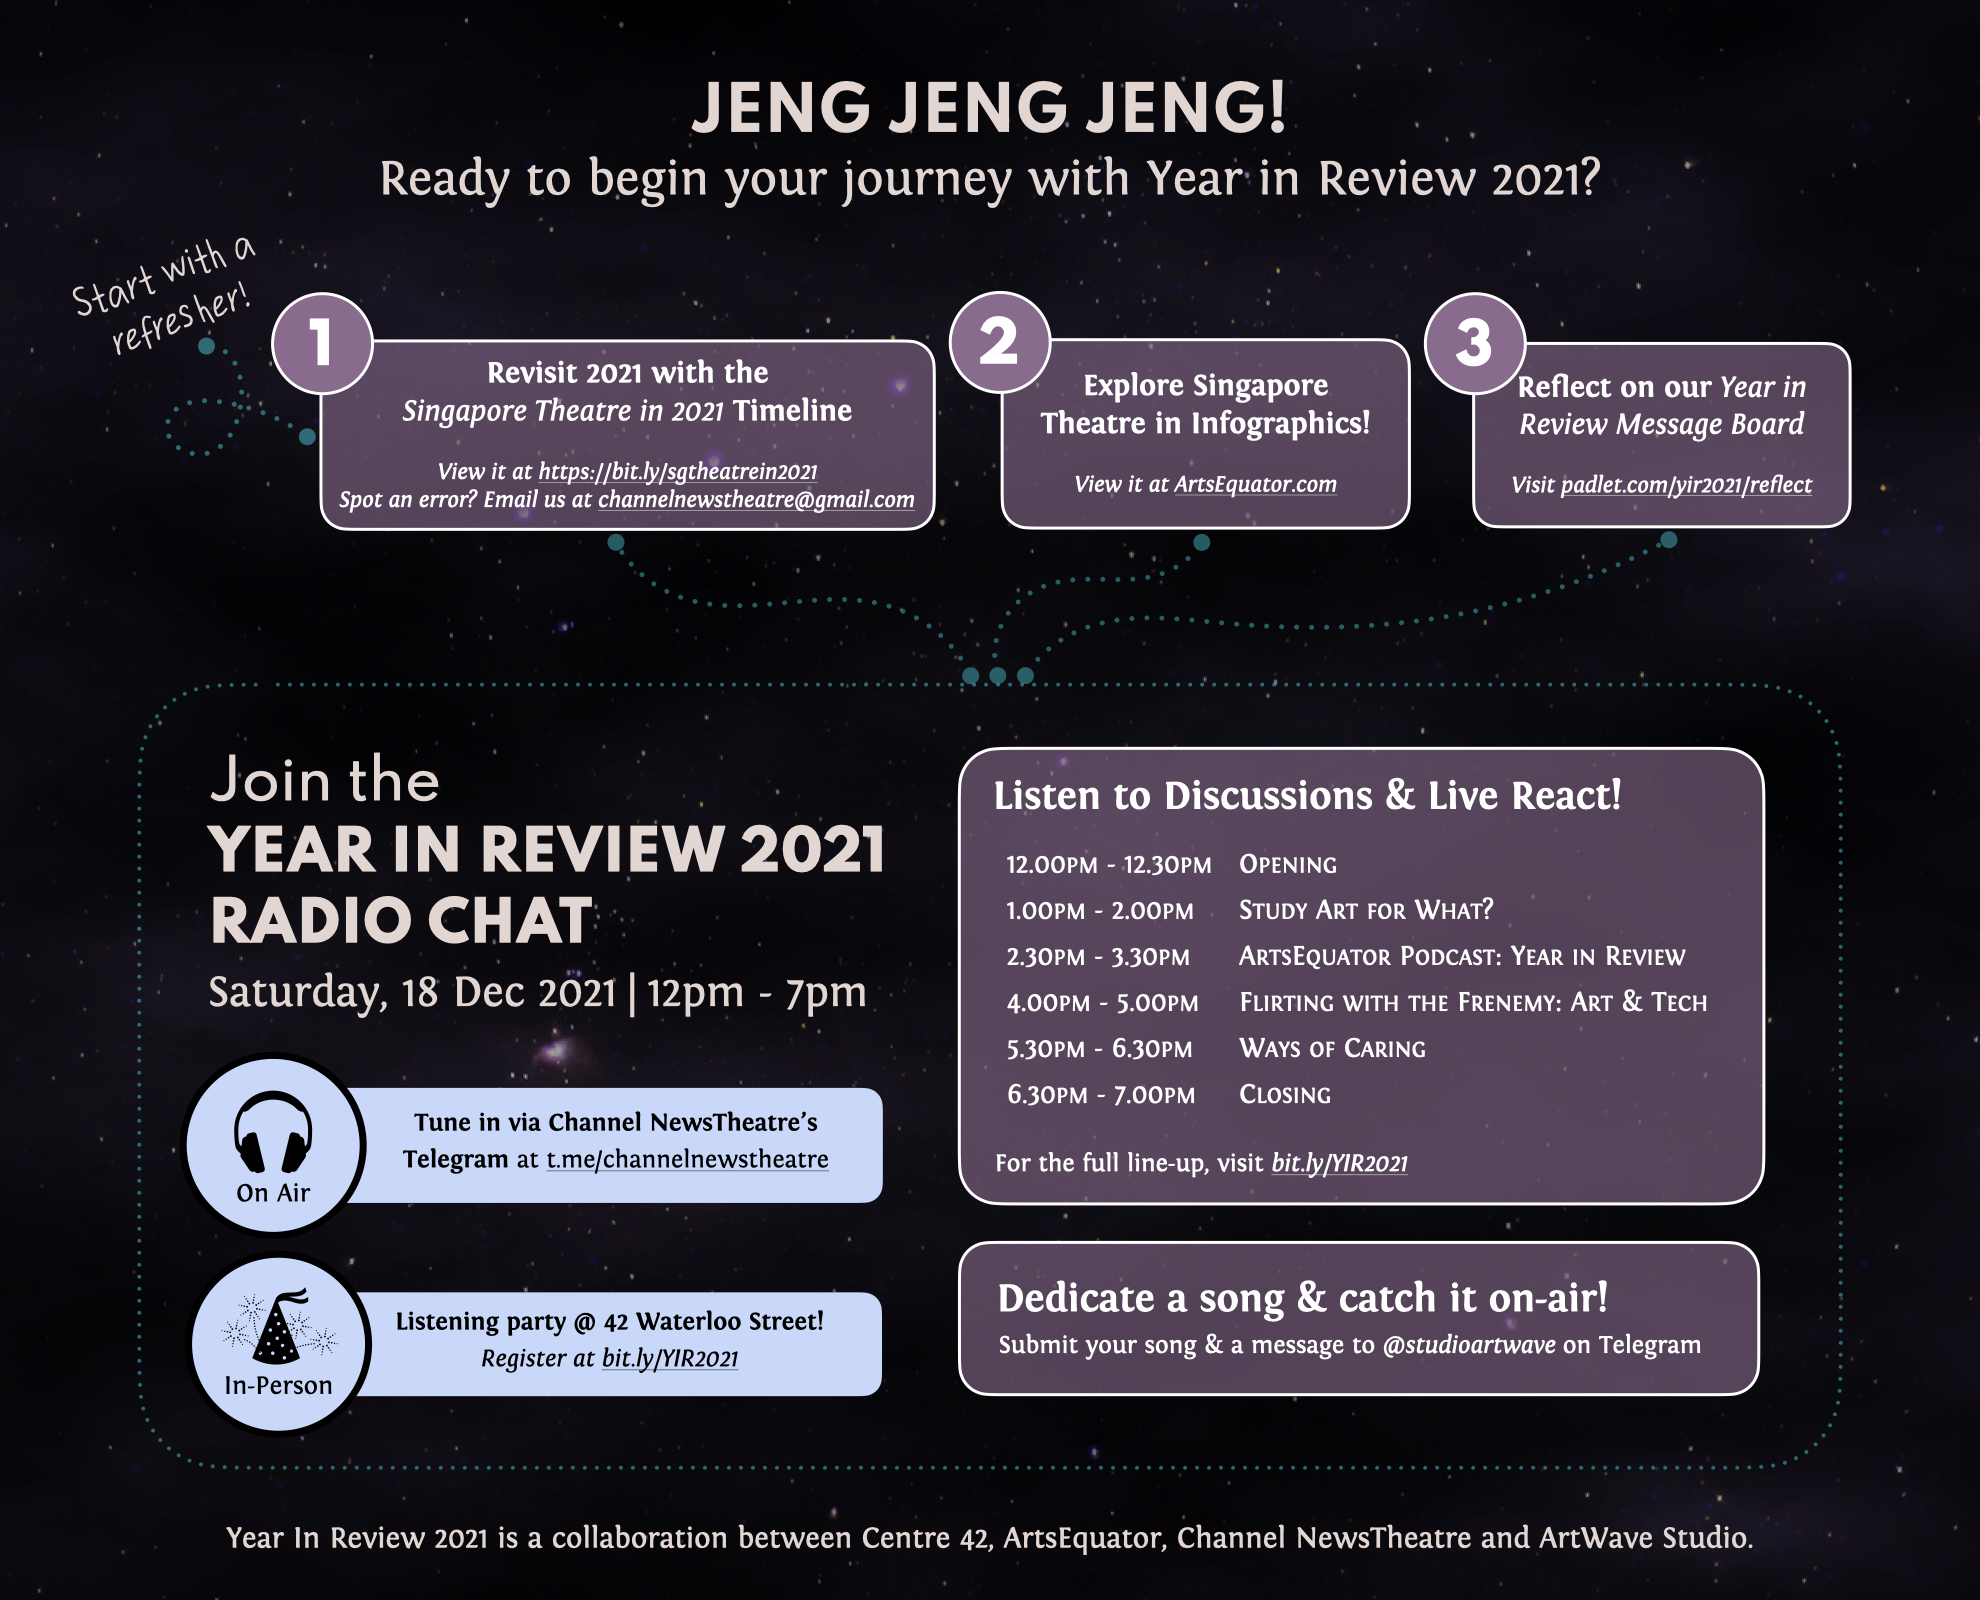 An explainer for how to attend Year in Review 2021.